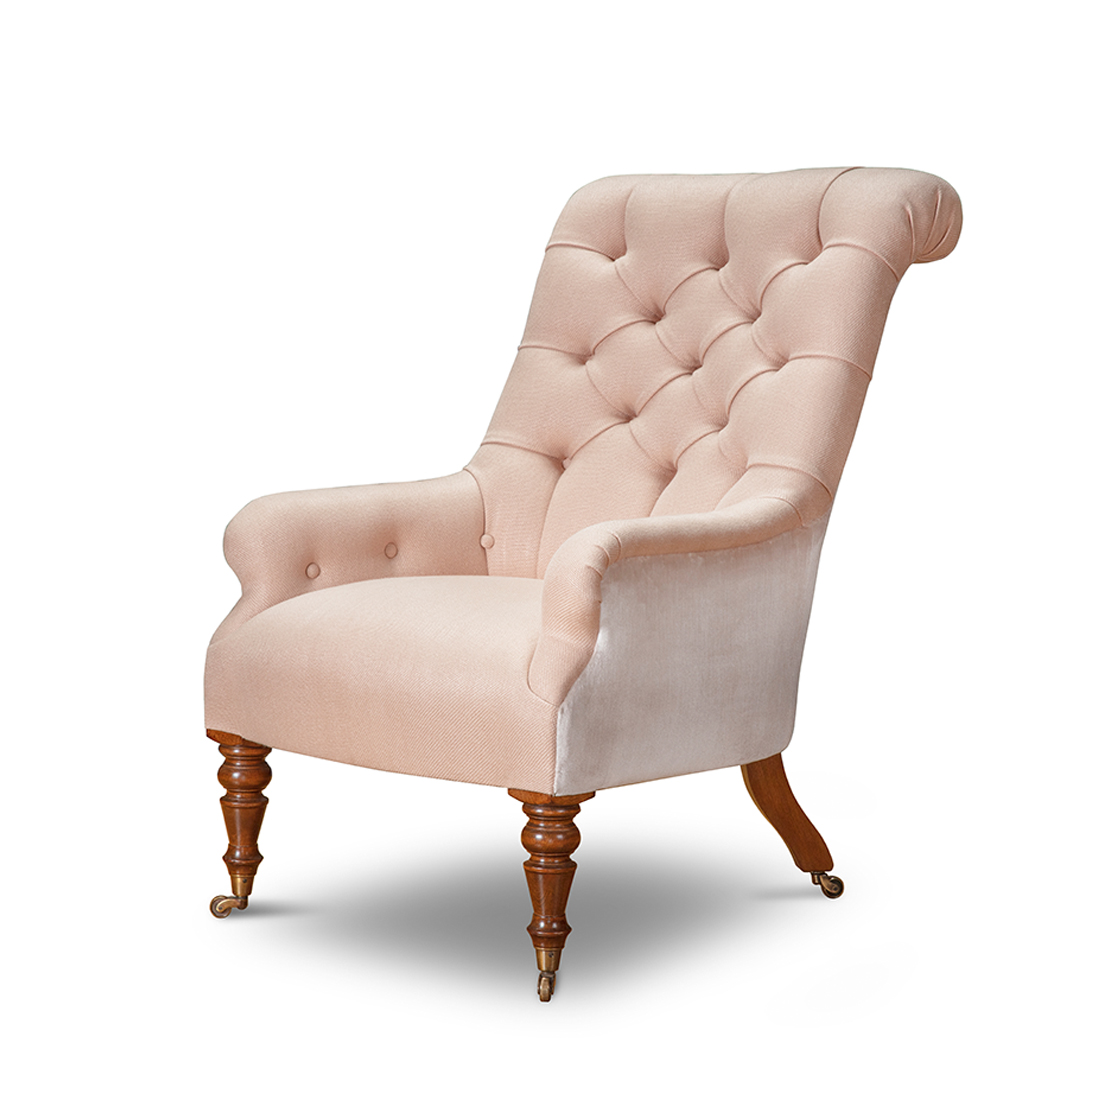 Waterford chair in Donegal - Chiffon and Capri - Blush - Beaumont & Fletcher